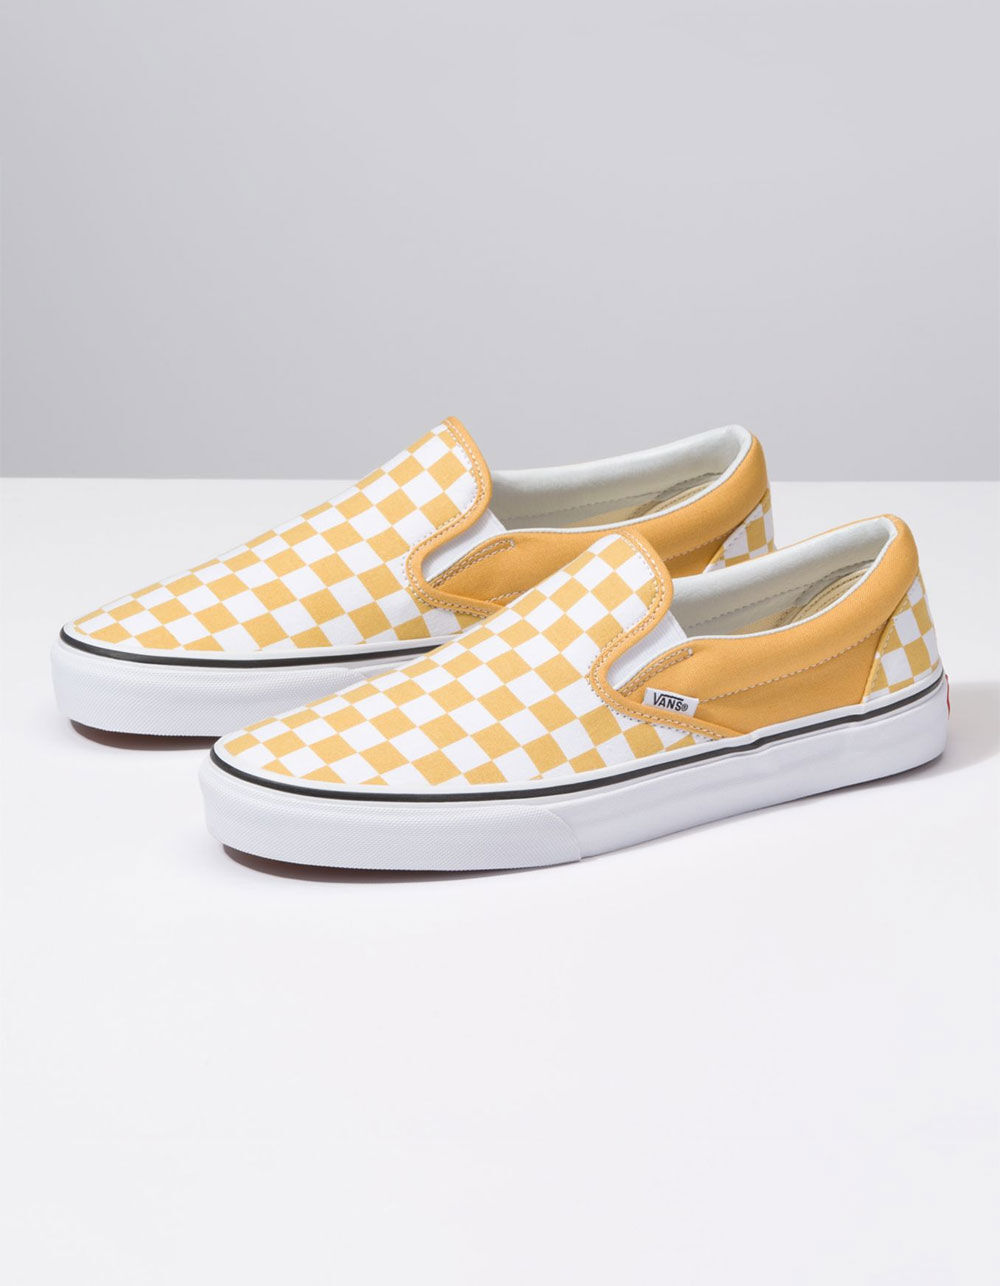 Vans Classic Slip On Checkerboard Men Yellow White Skate Shoe Casual  Trainers